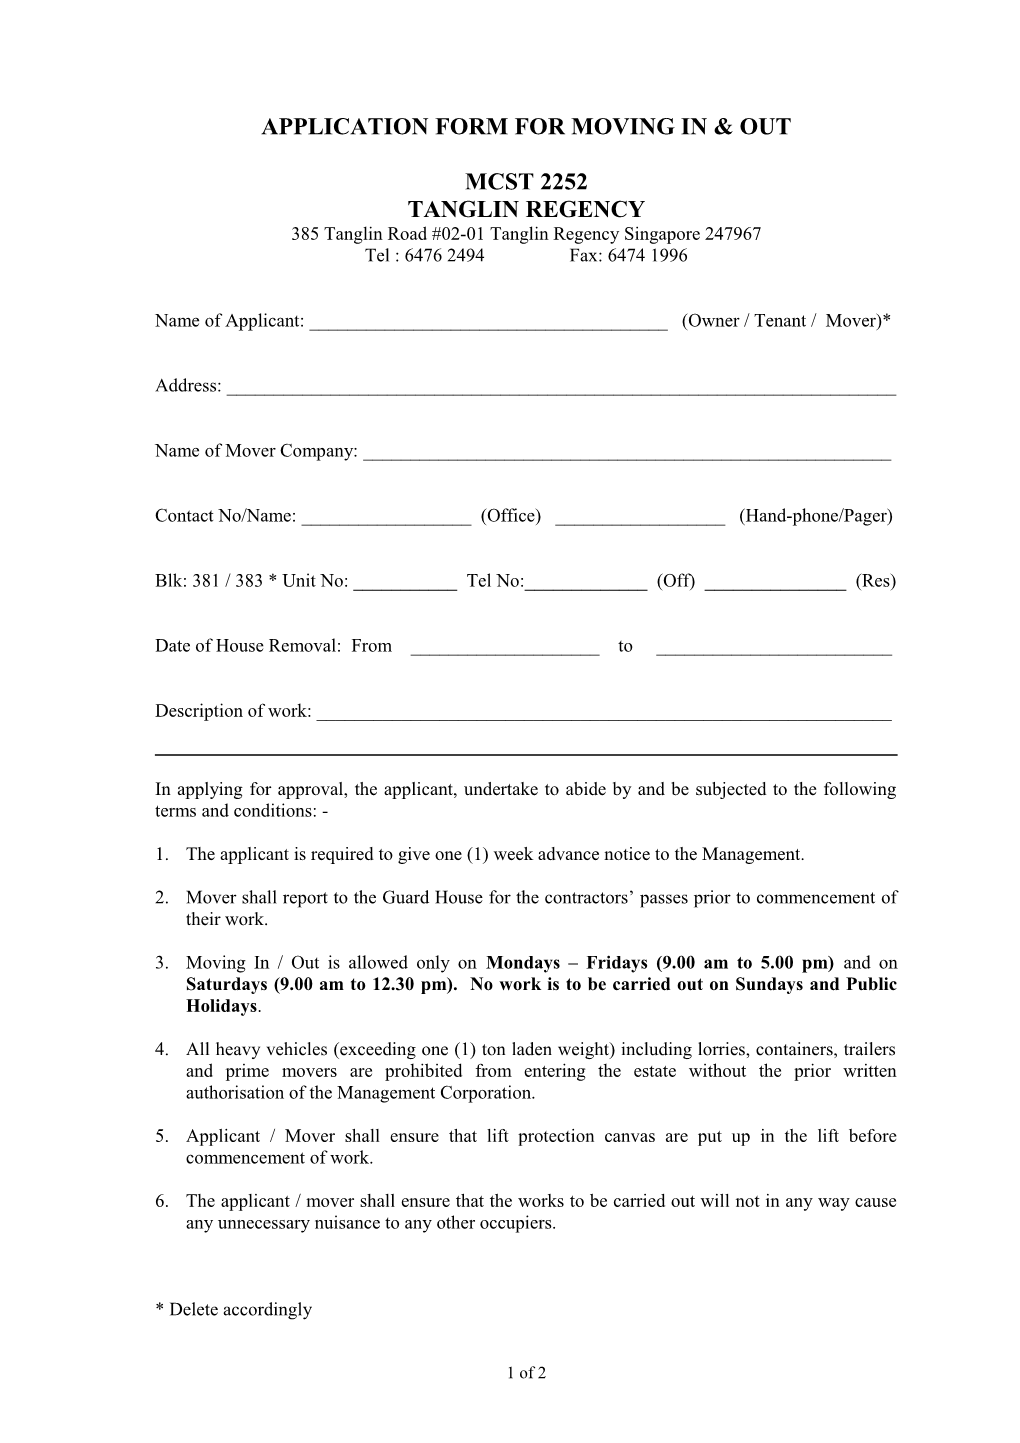 Application Form for Moving in & Out